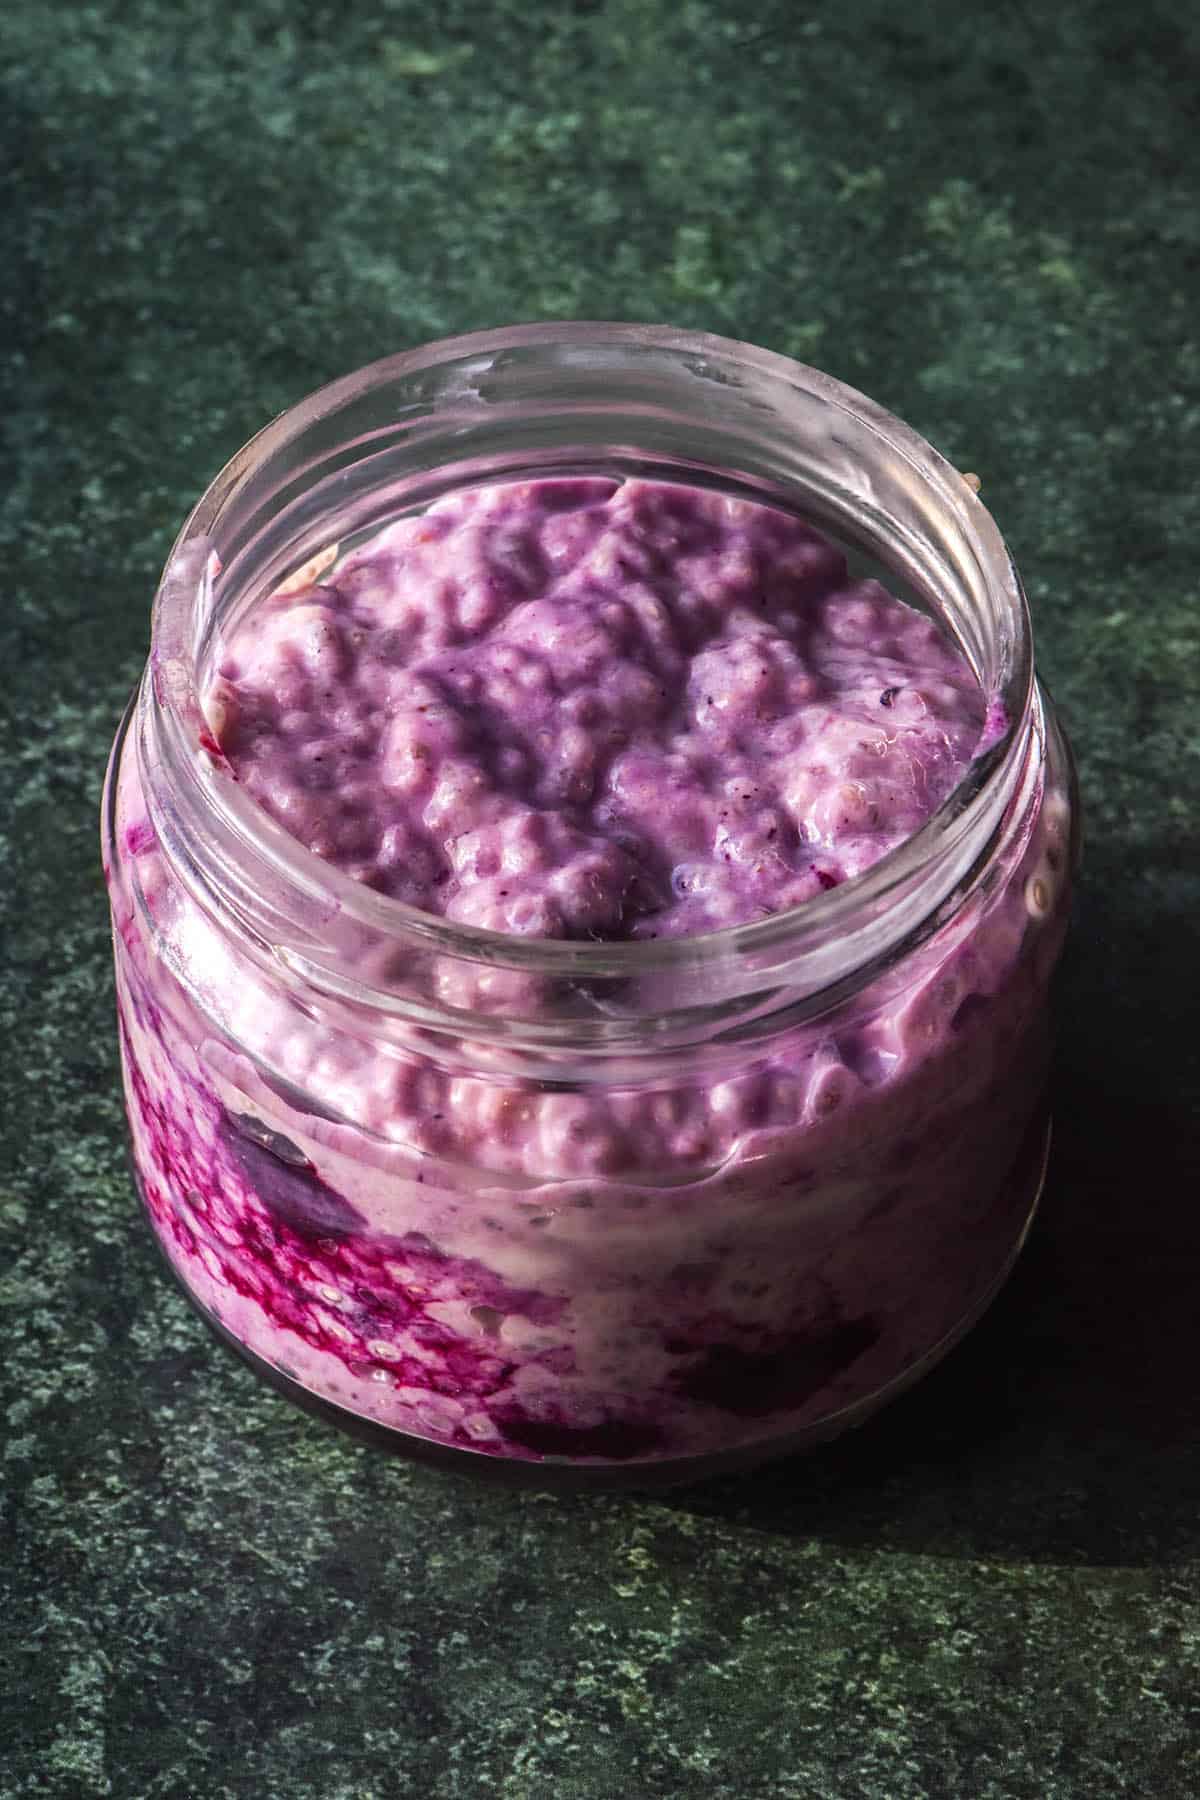 A side on image of a jar of low FODMAP chia pudding that has been swirled with defrosted frozen blueberries, giving it a vibrant purple colour. The chia pudding sits atop a dark green background